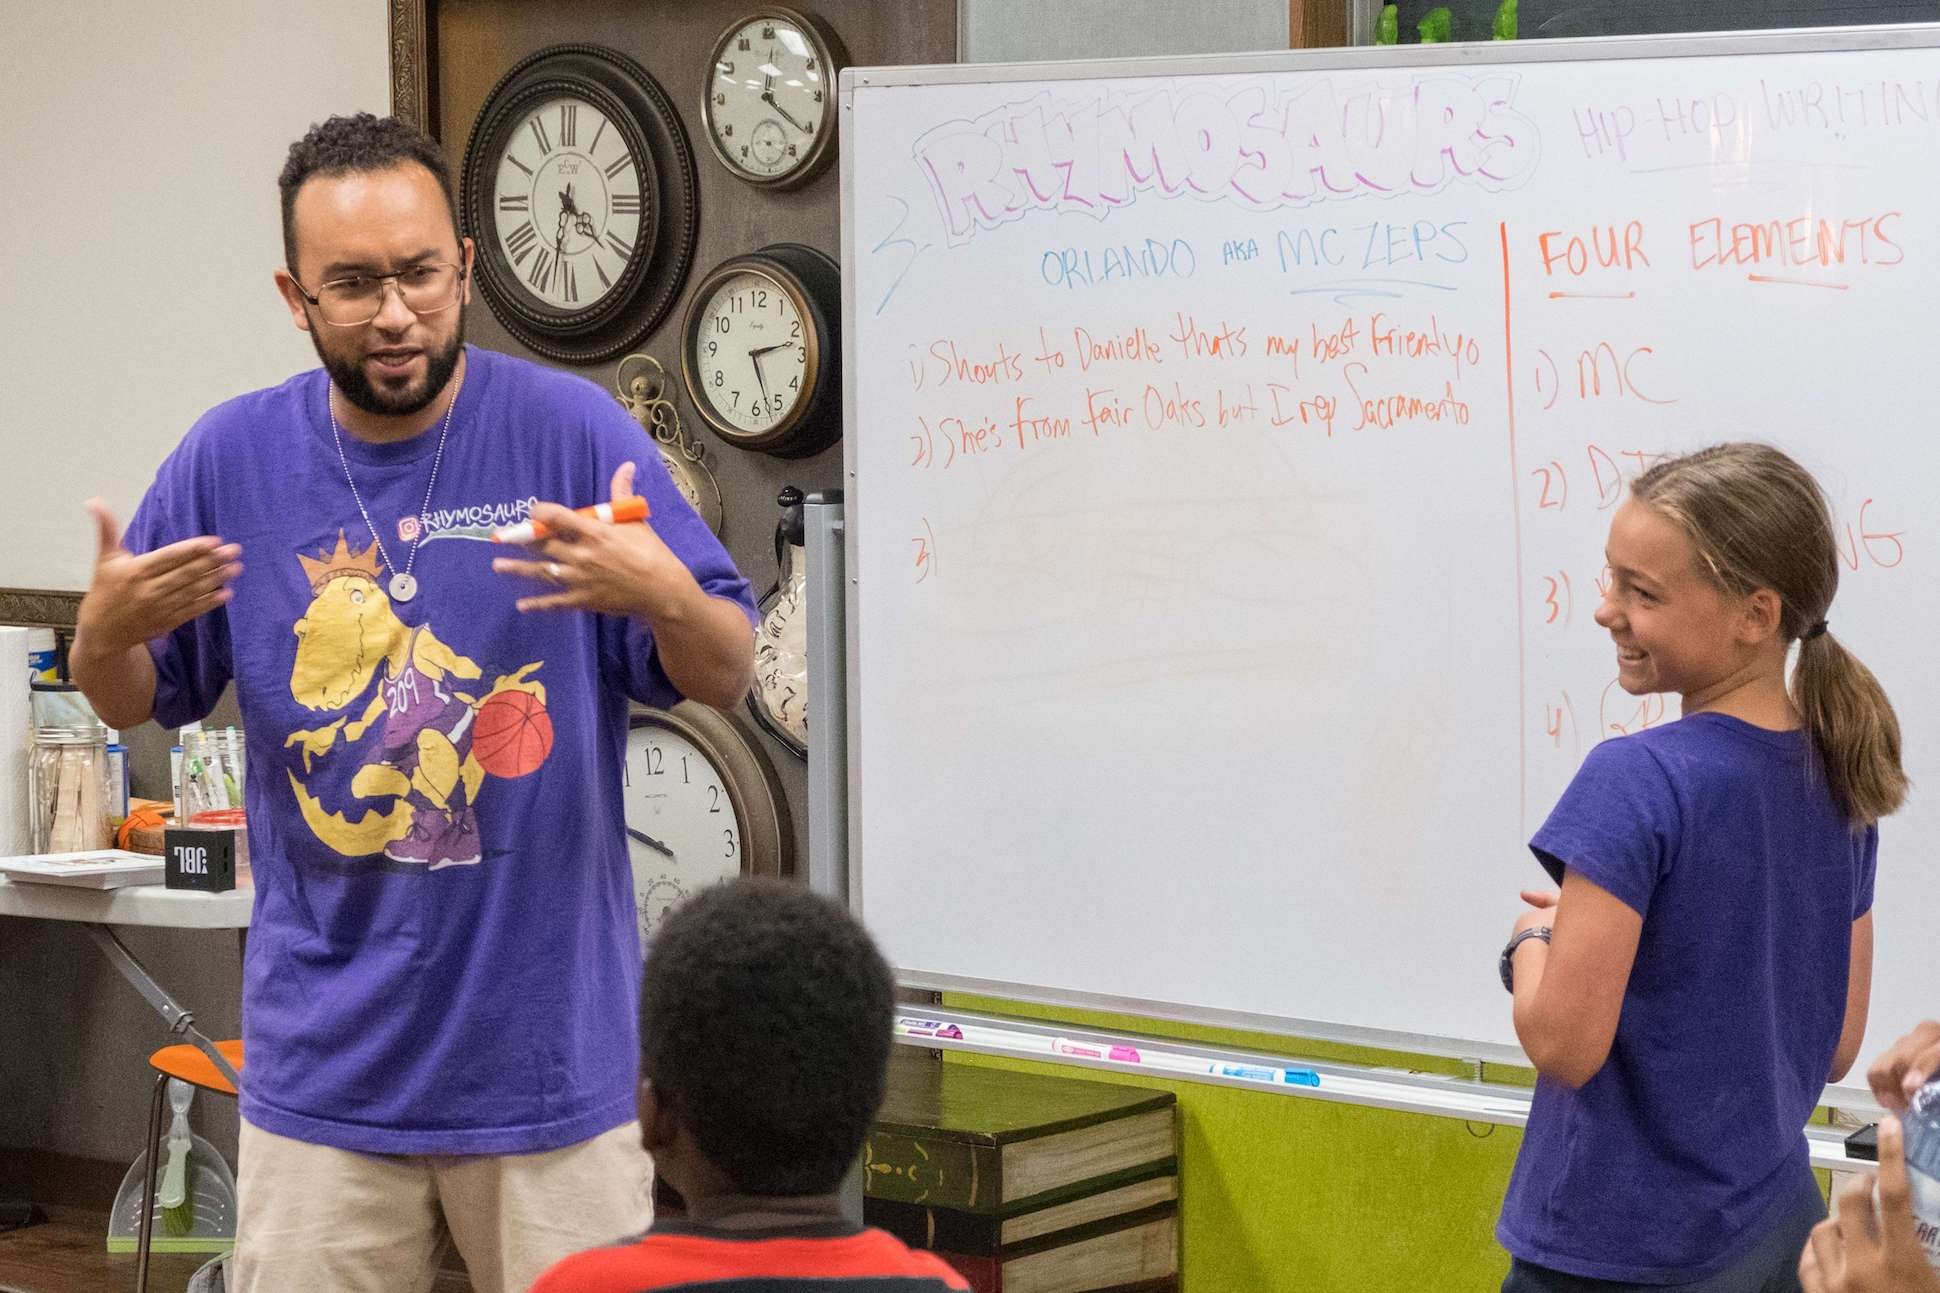 Guest teaching artist stands in front of a whiteboard with tips for spoken word poetry presentation. A smiling student stands next to him.